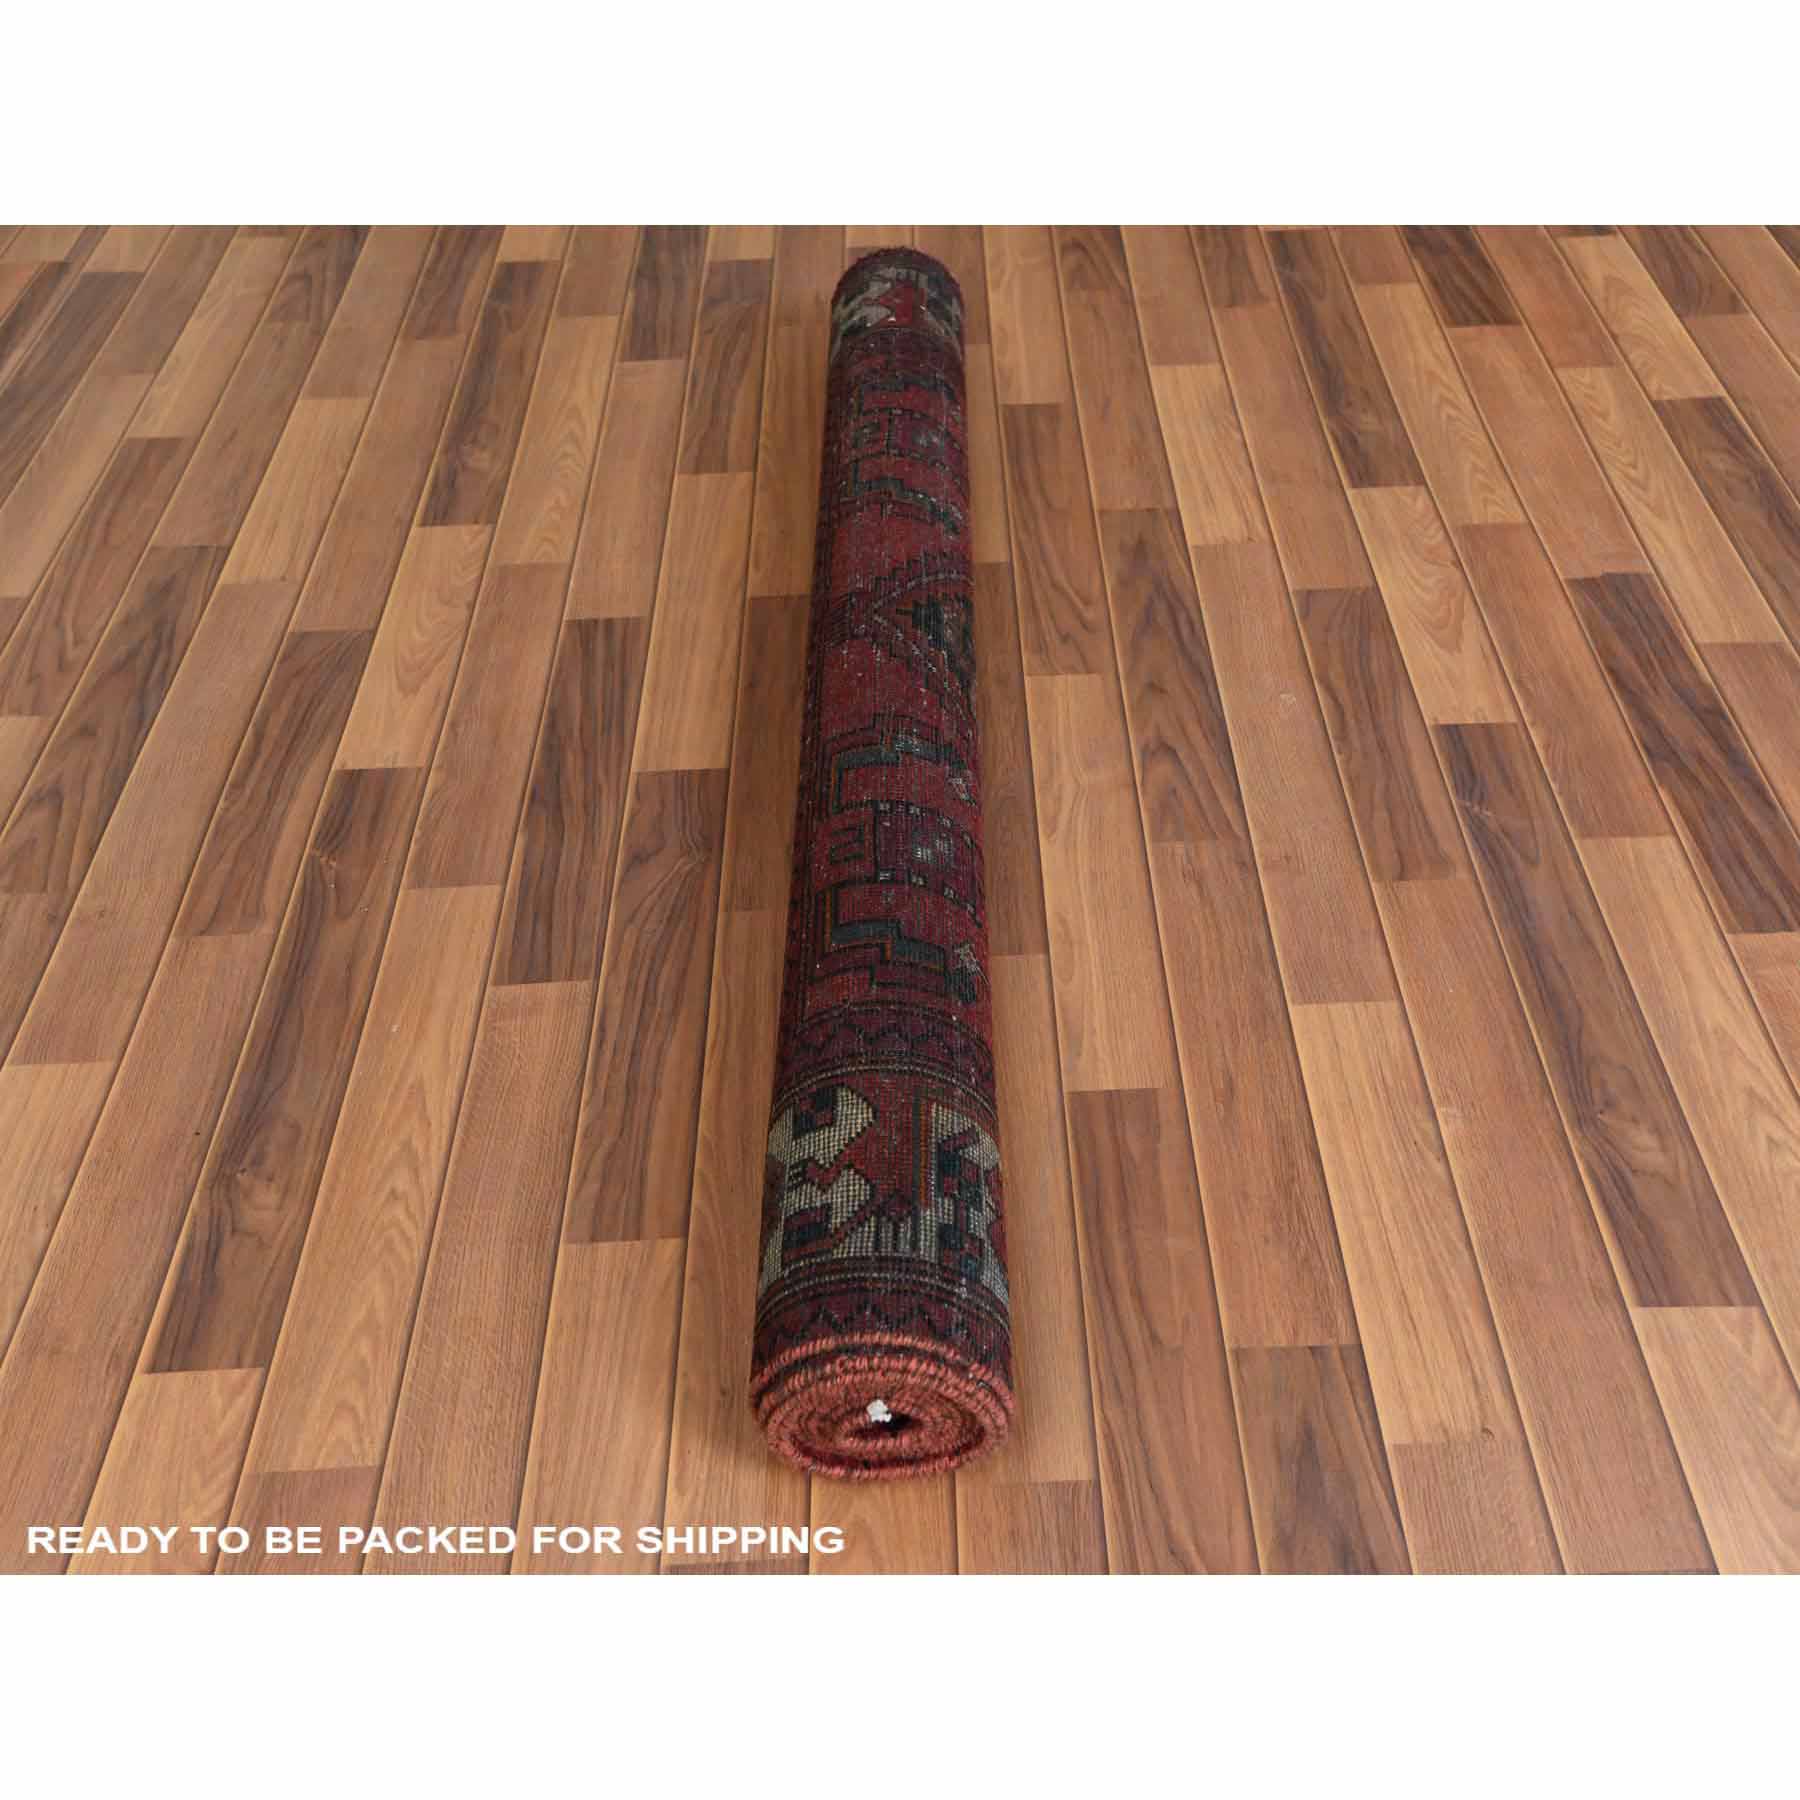 Overdyed-Vintage-Hand-Knotted-Rug-289900